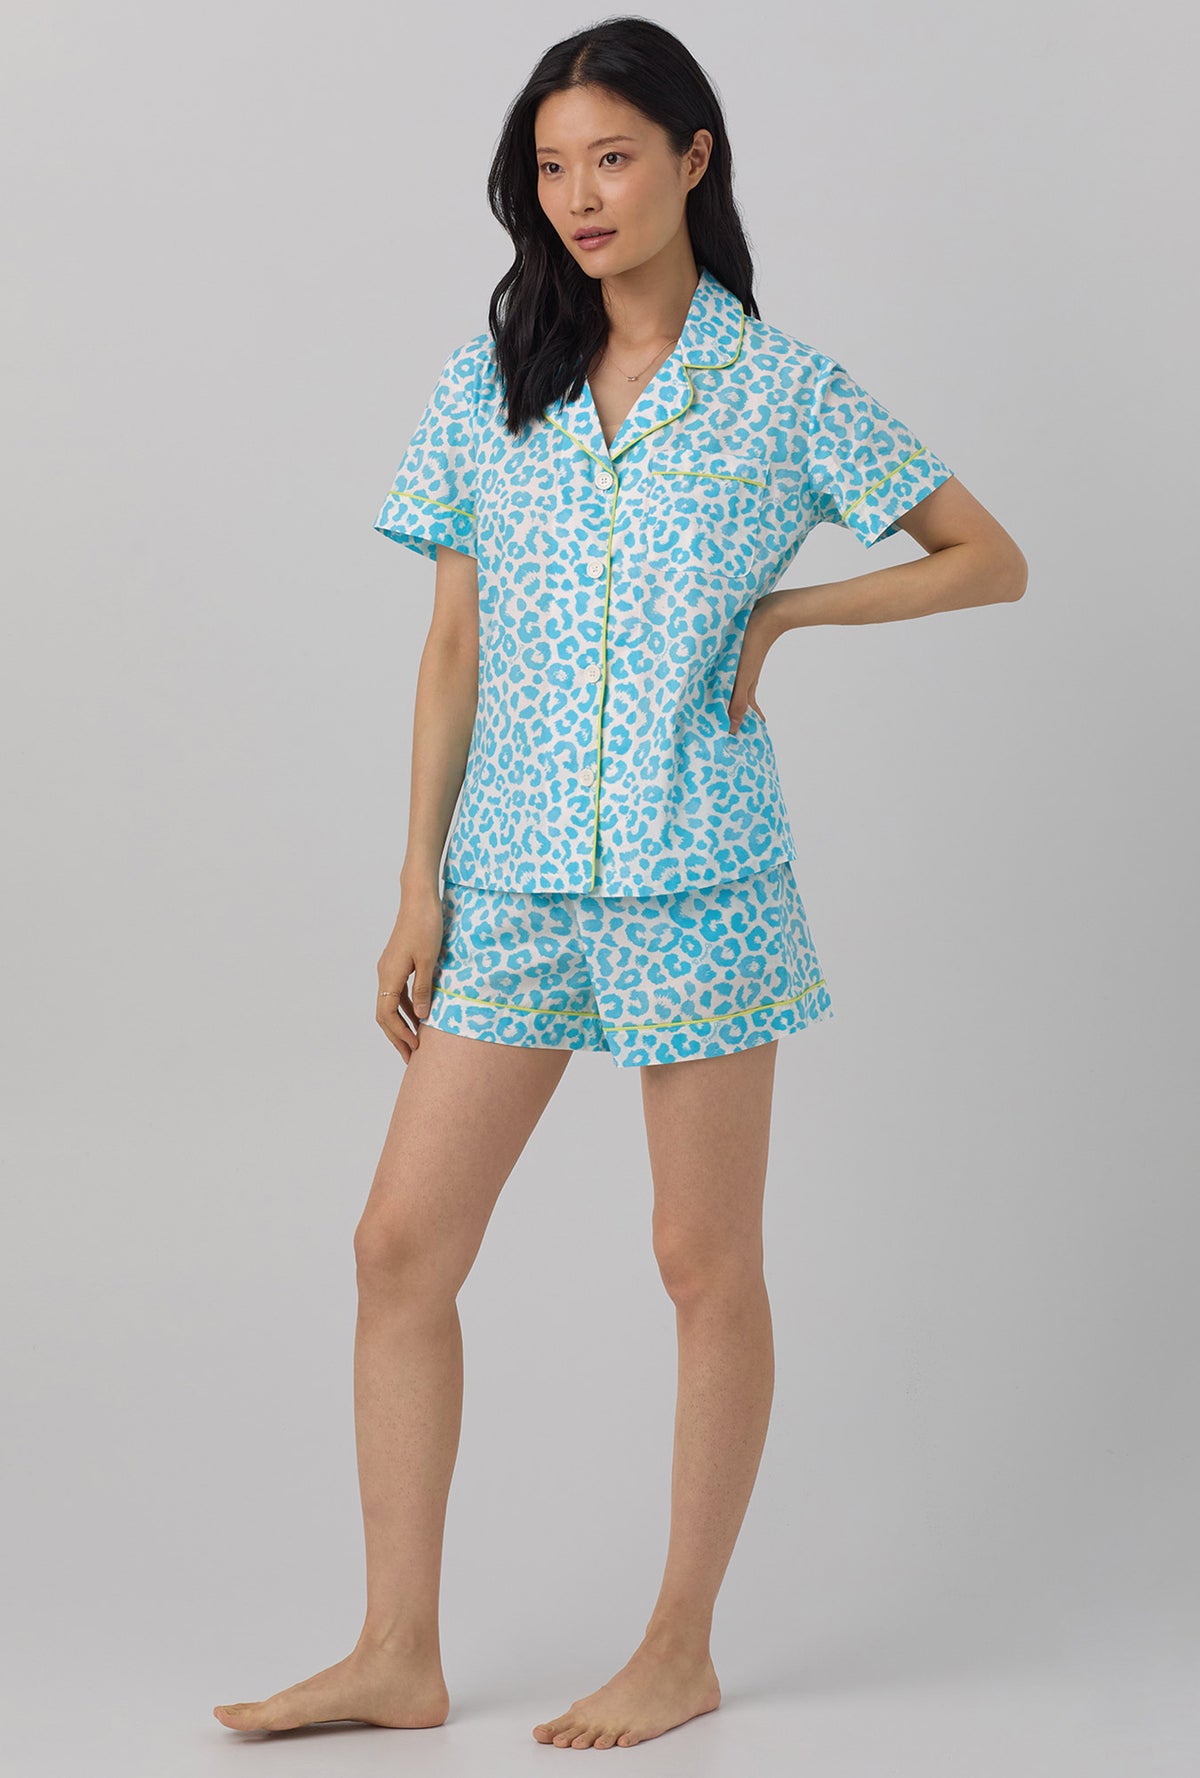 A lady wearing Short Sleeve Classic Shorty Woven Cotton Poplin PJ Set with sea bright animal